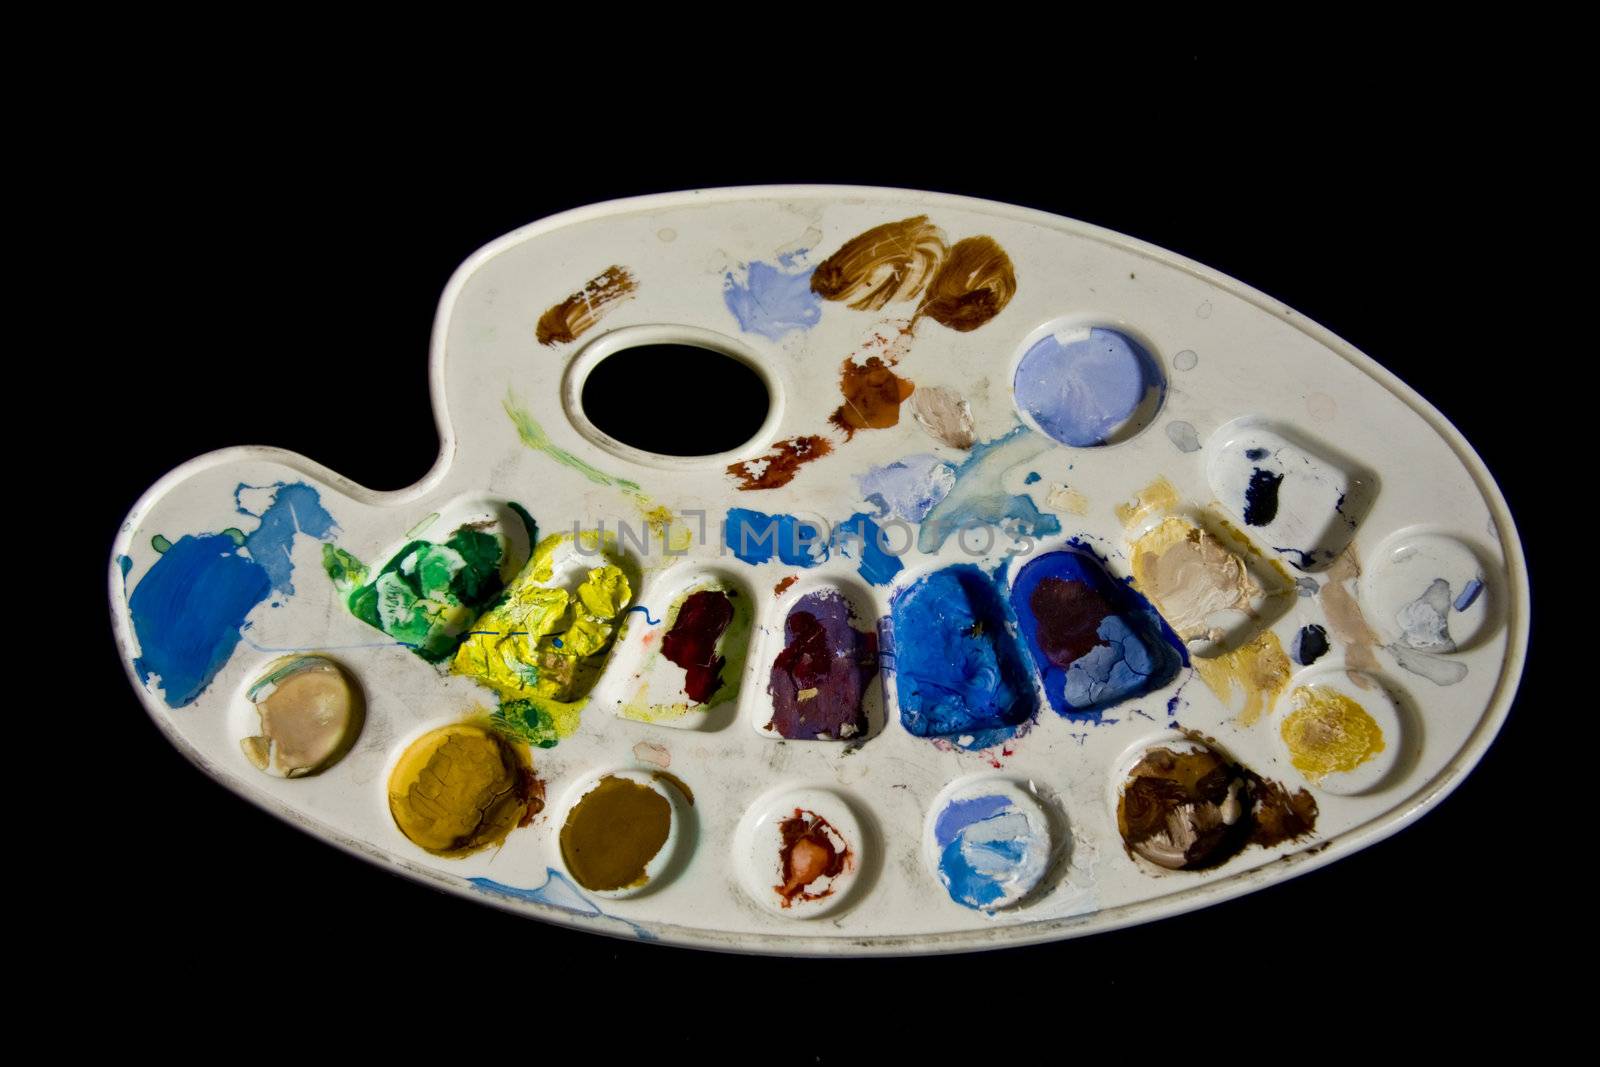 painter's full utensils of color, almost abstract